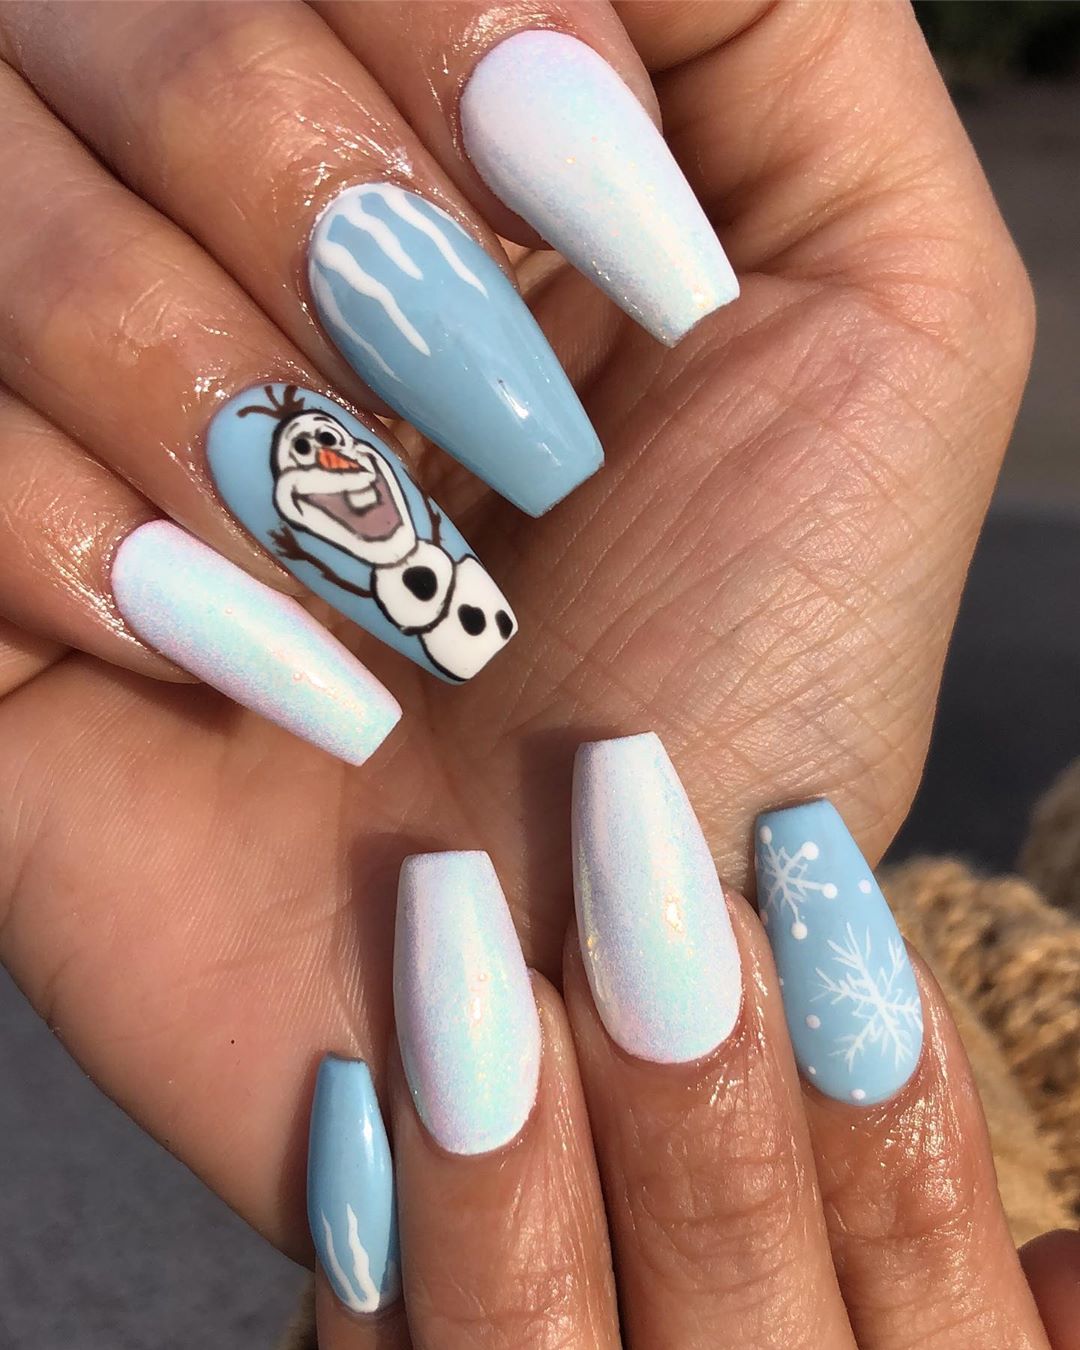 Olaf from Frozen on Christmas / wintery nails